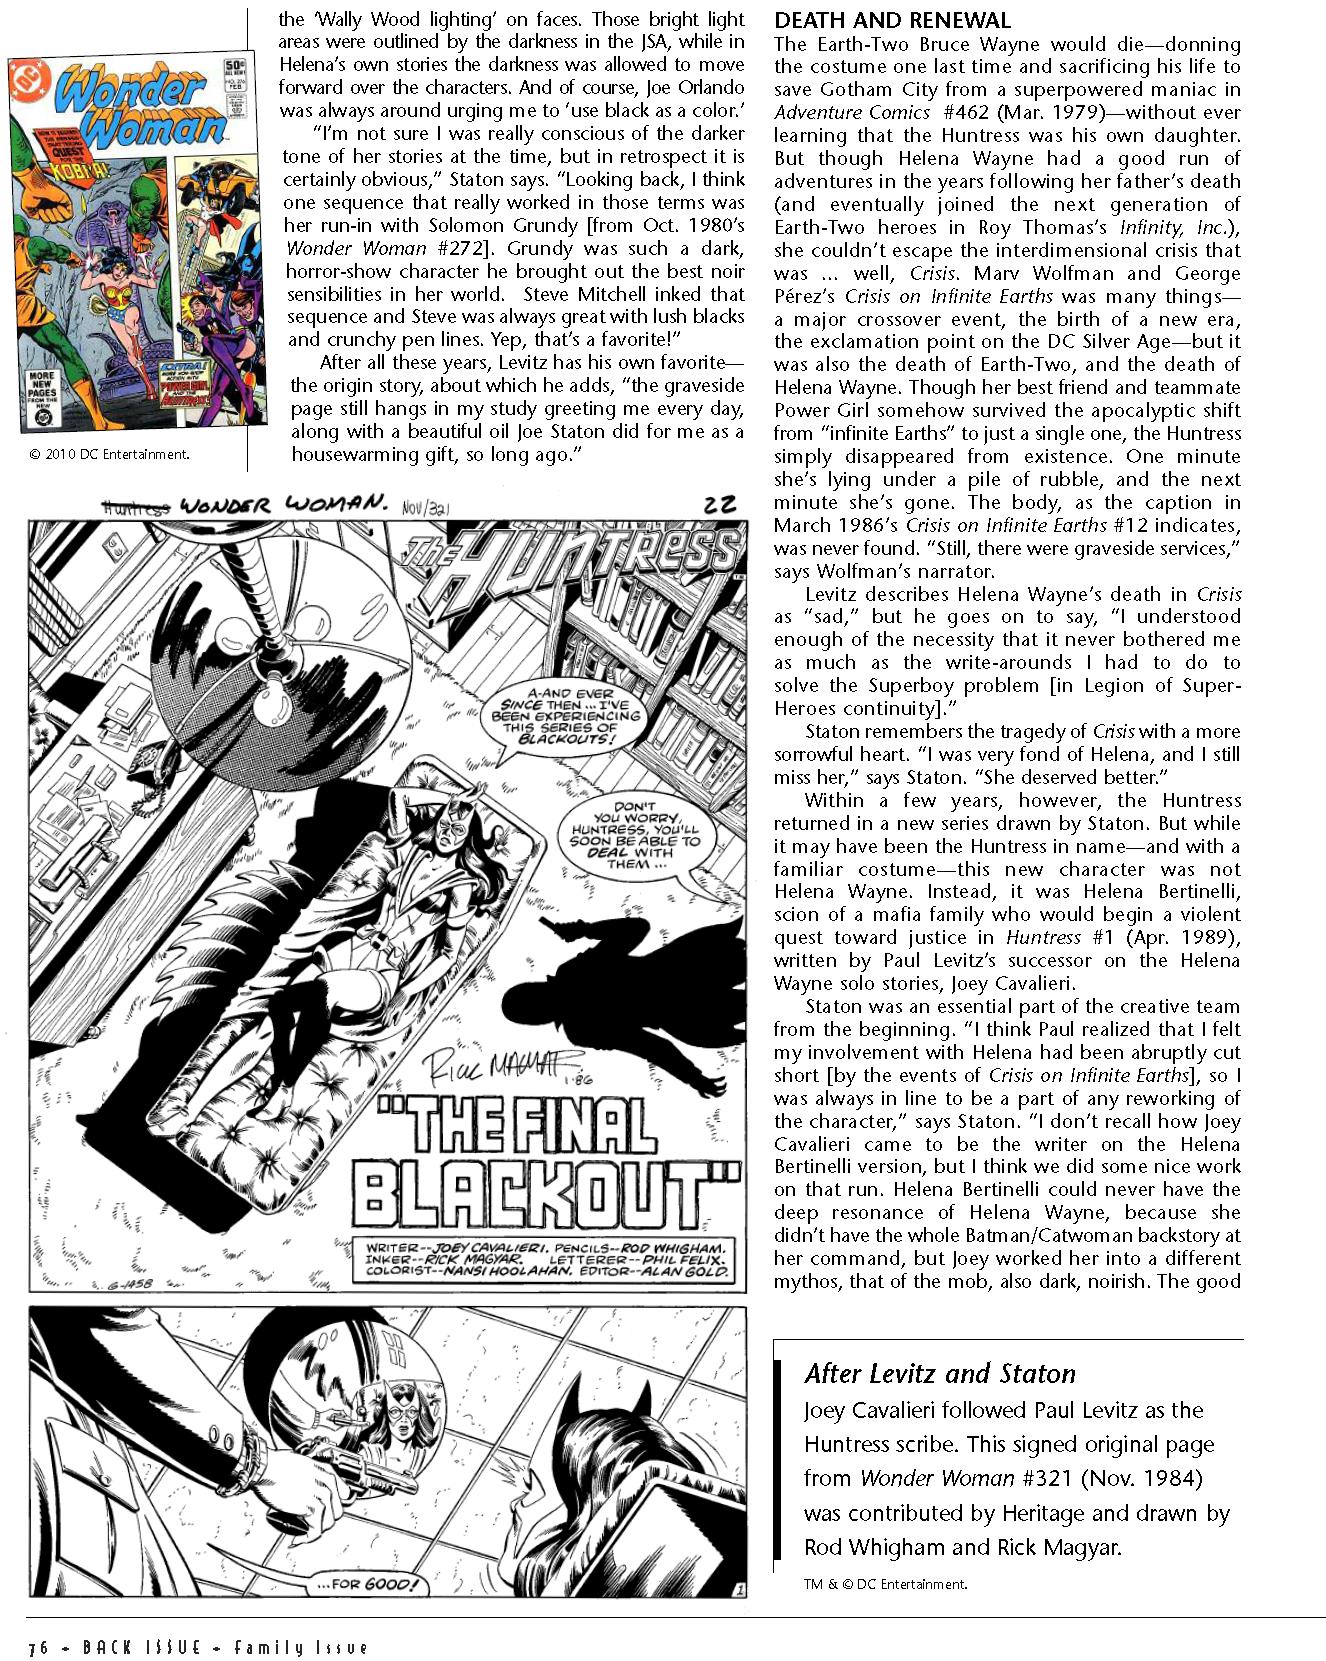 Read online Back Issue comic -  Issue #38 - 78